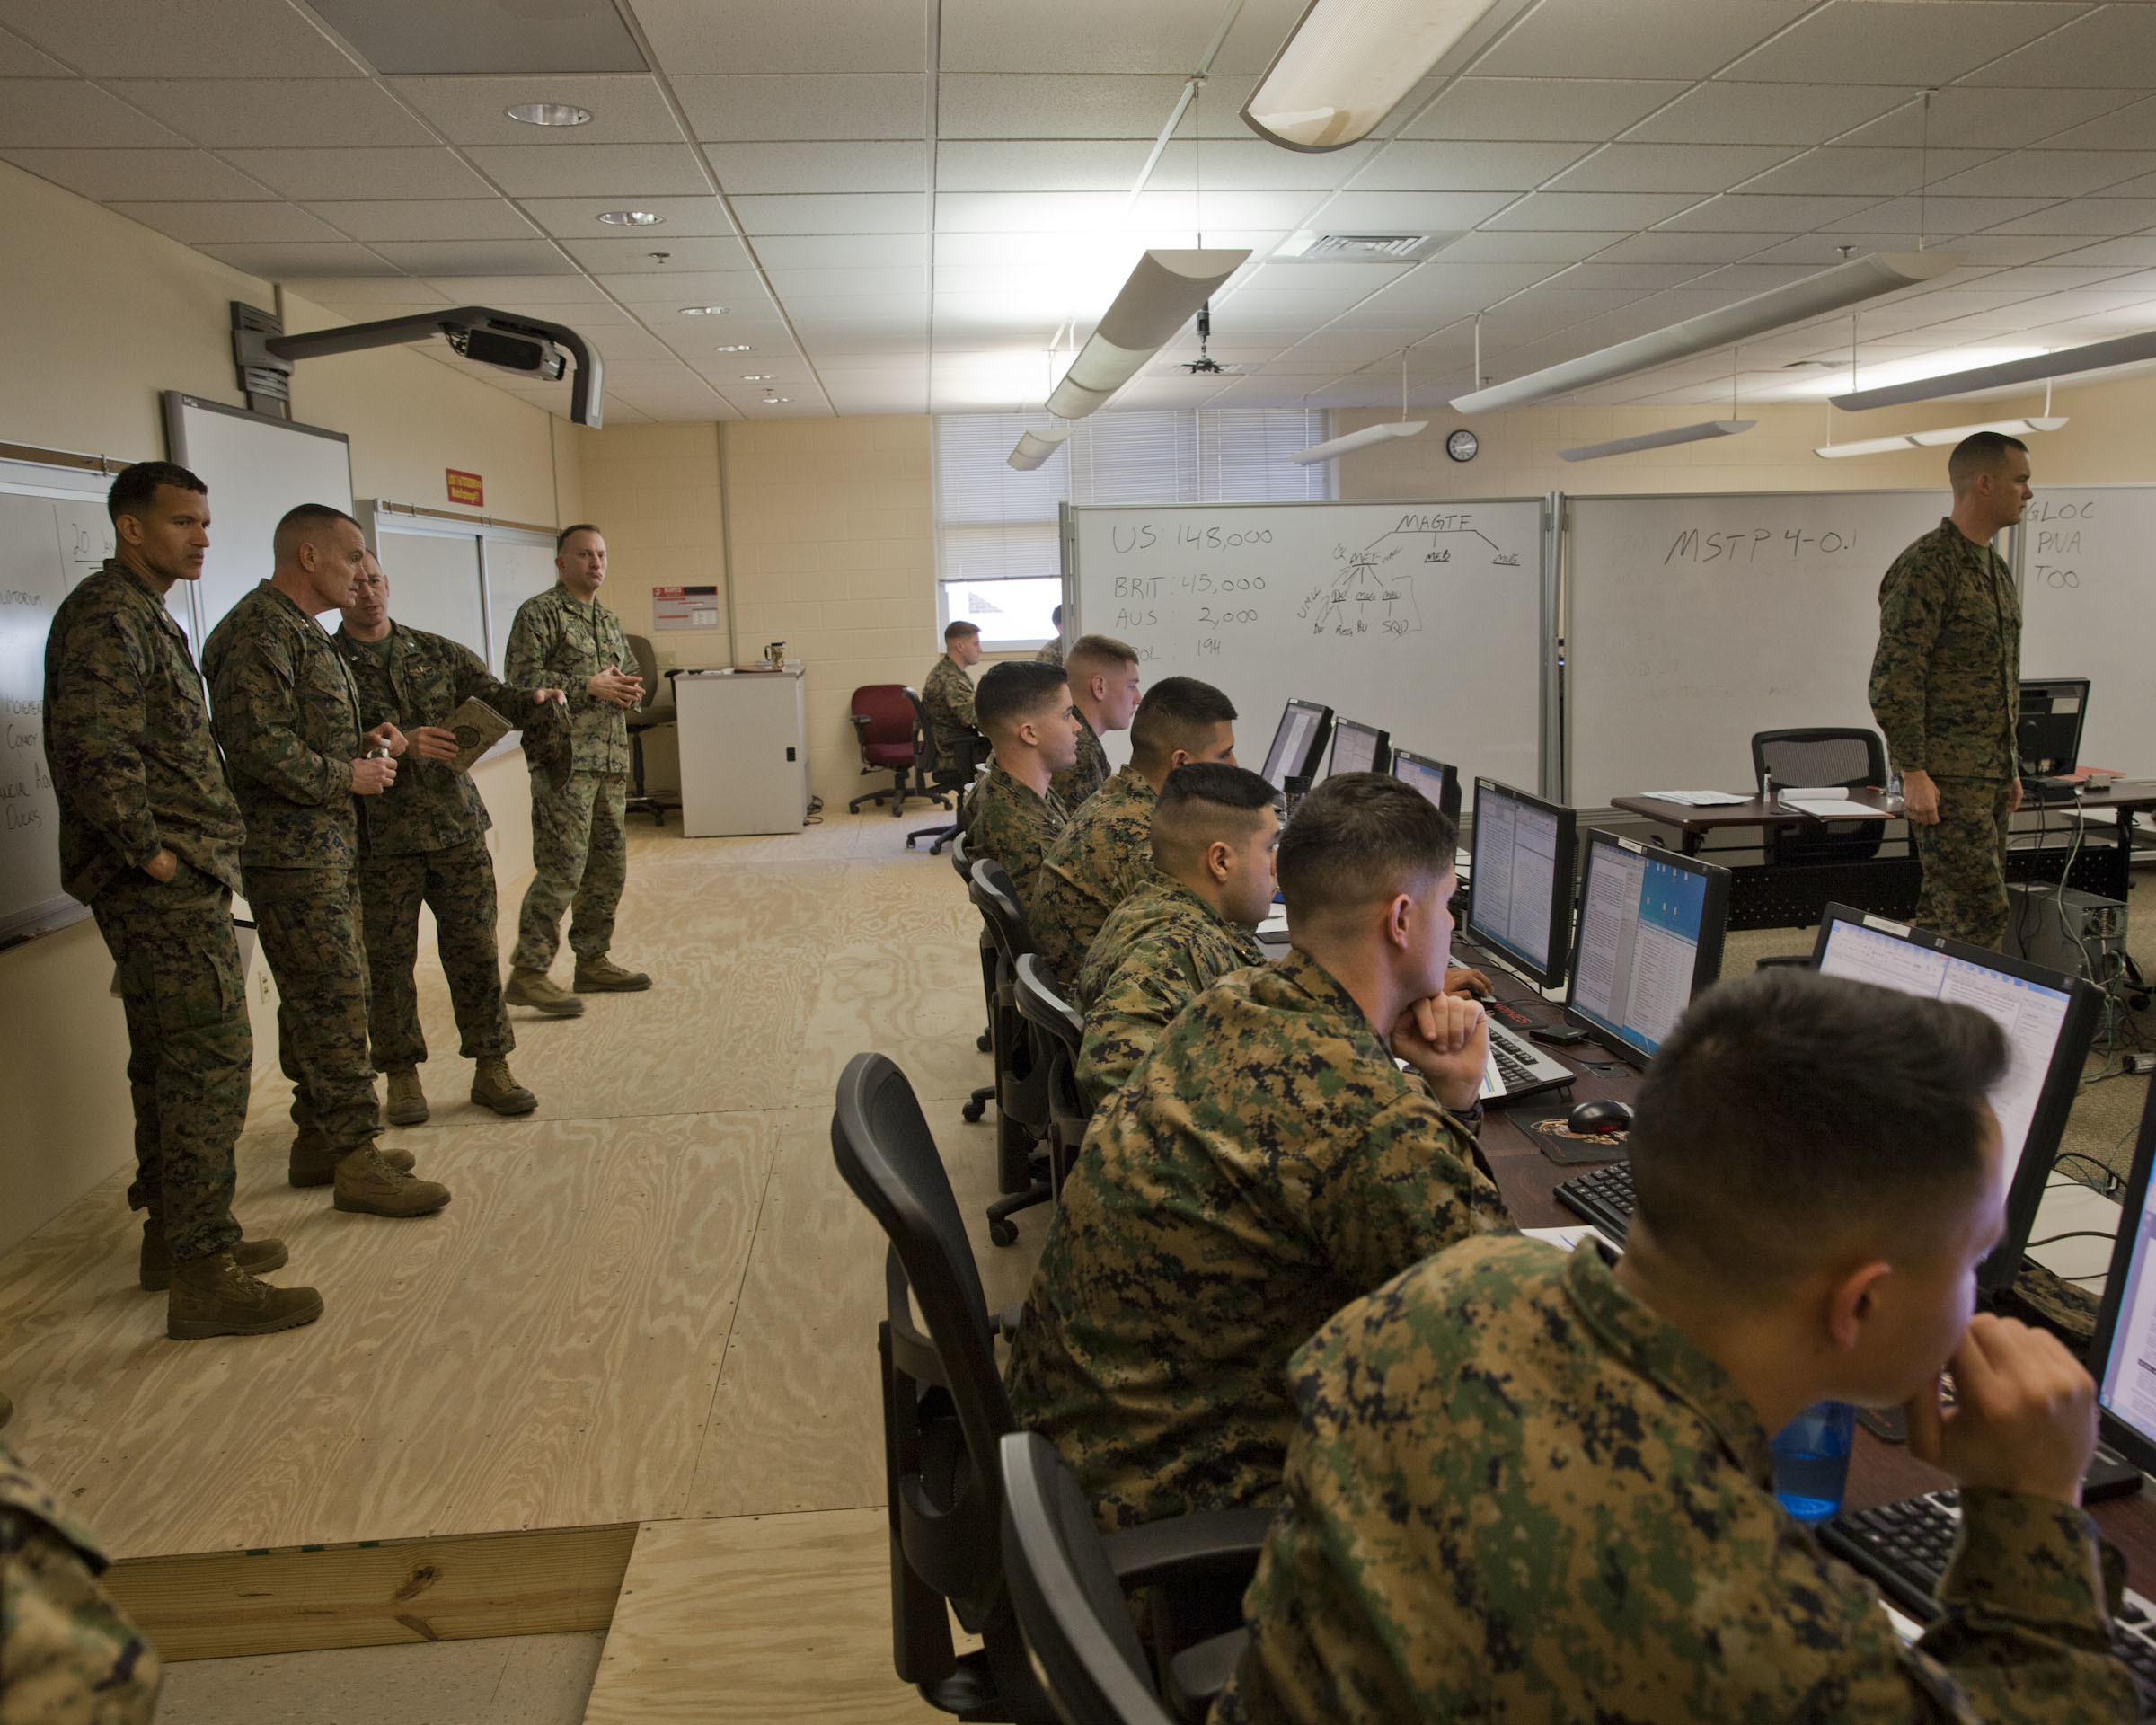 Photo by Lance Cpl. Amy Plunkett, Marine Corps Combat Service Support Schools. The appearance of U.S. Department of Defense (DoD) visual information does not imply or constitute DoD endorsement.